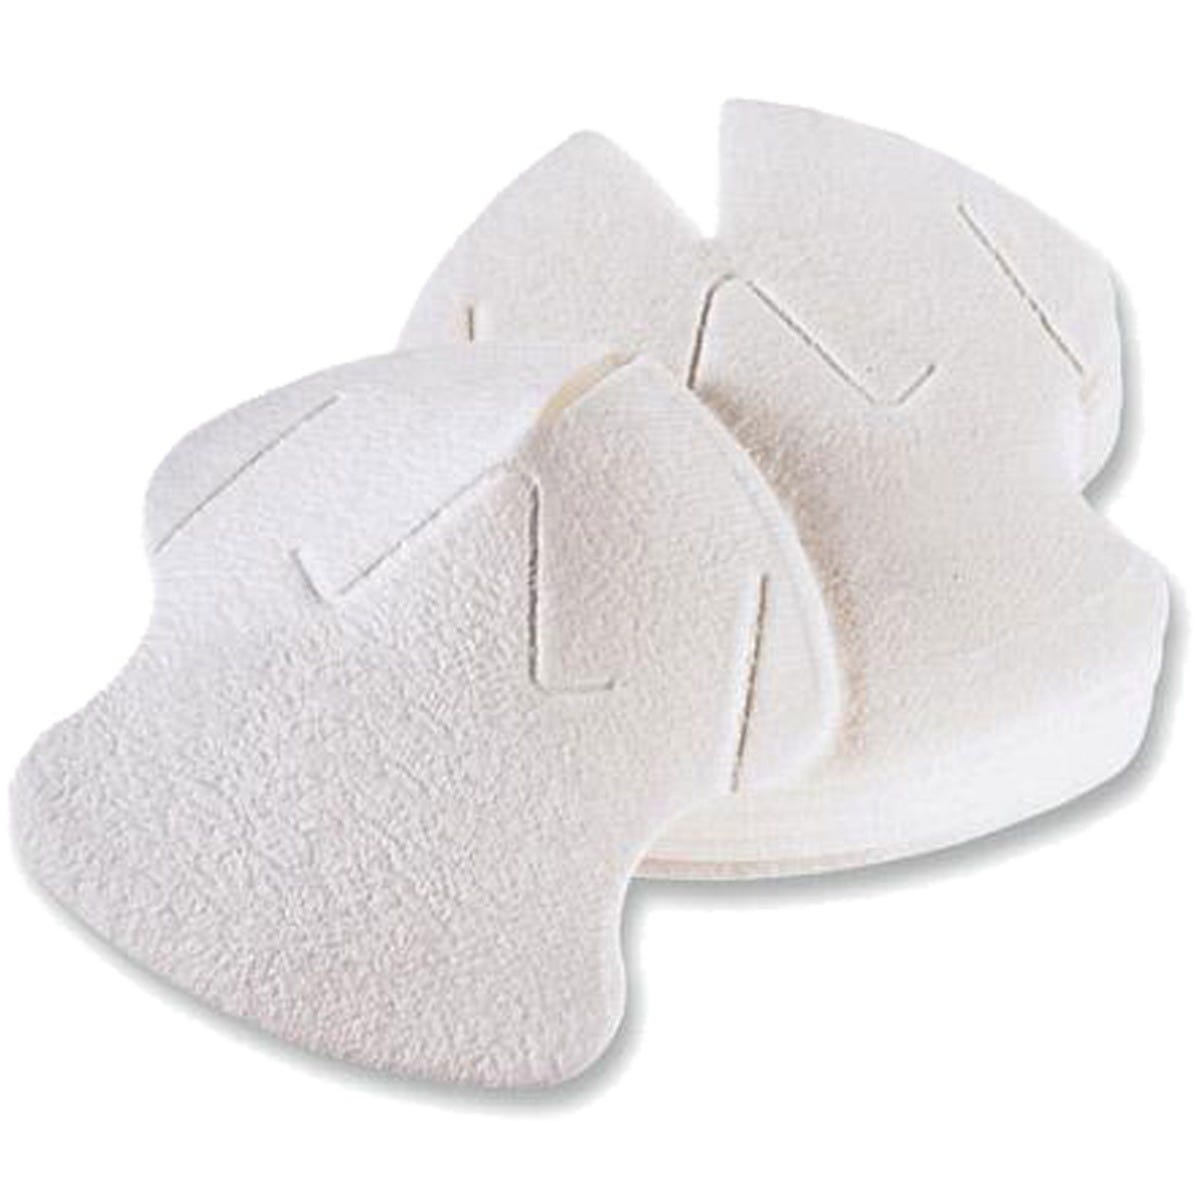 MOD 1/2/3 Absorbent Pads / White (2021) - The Parts Lodge